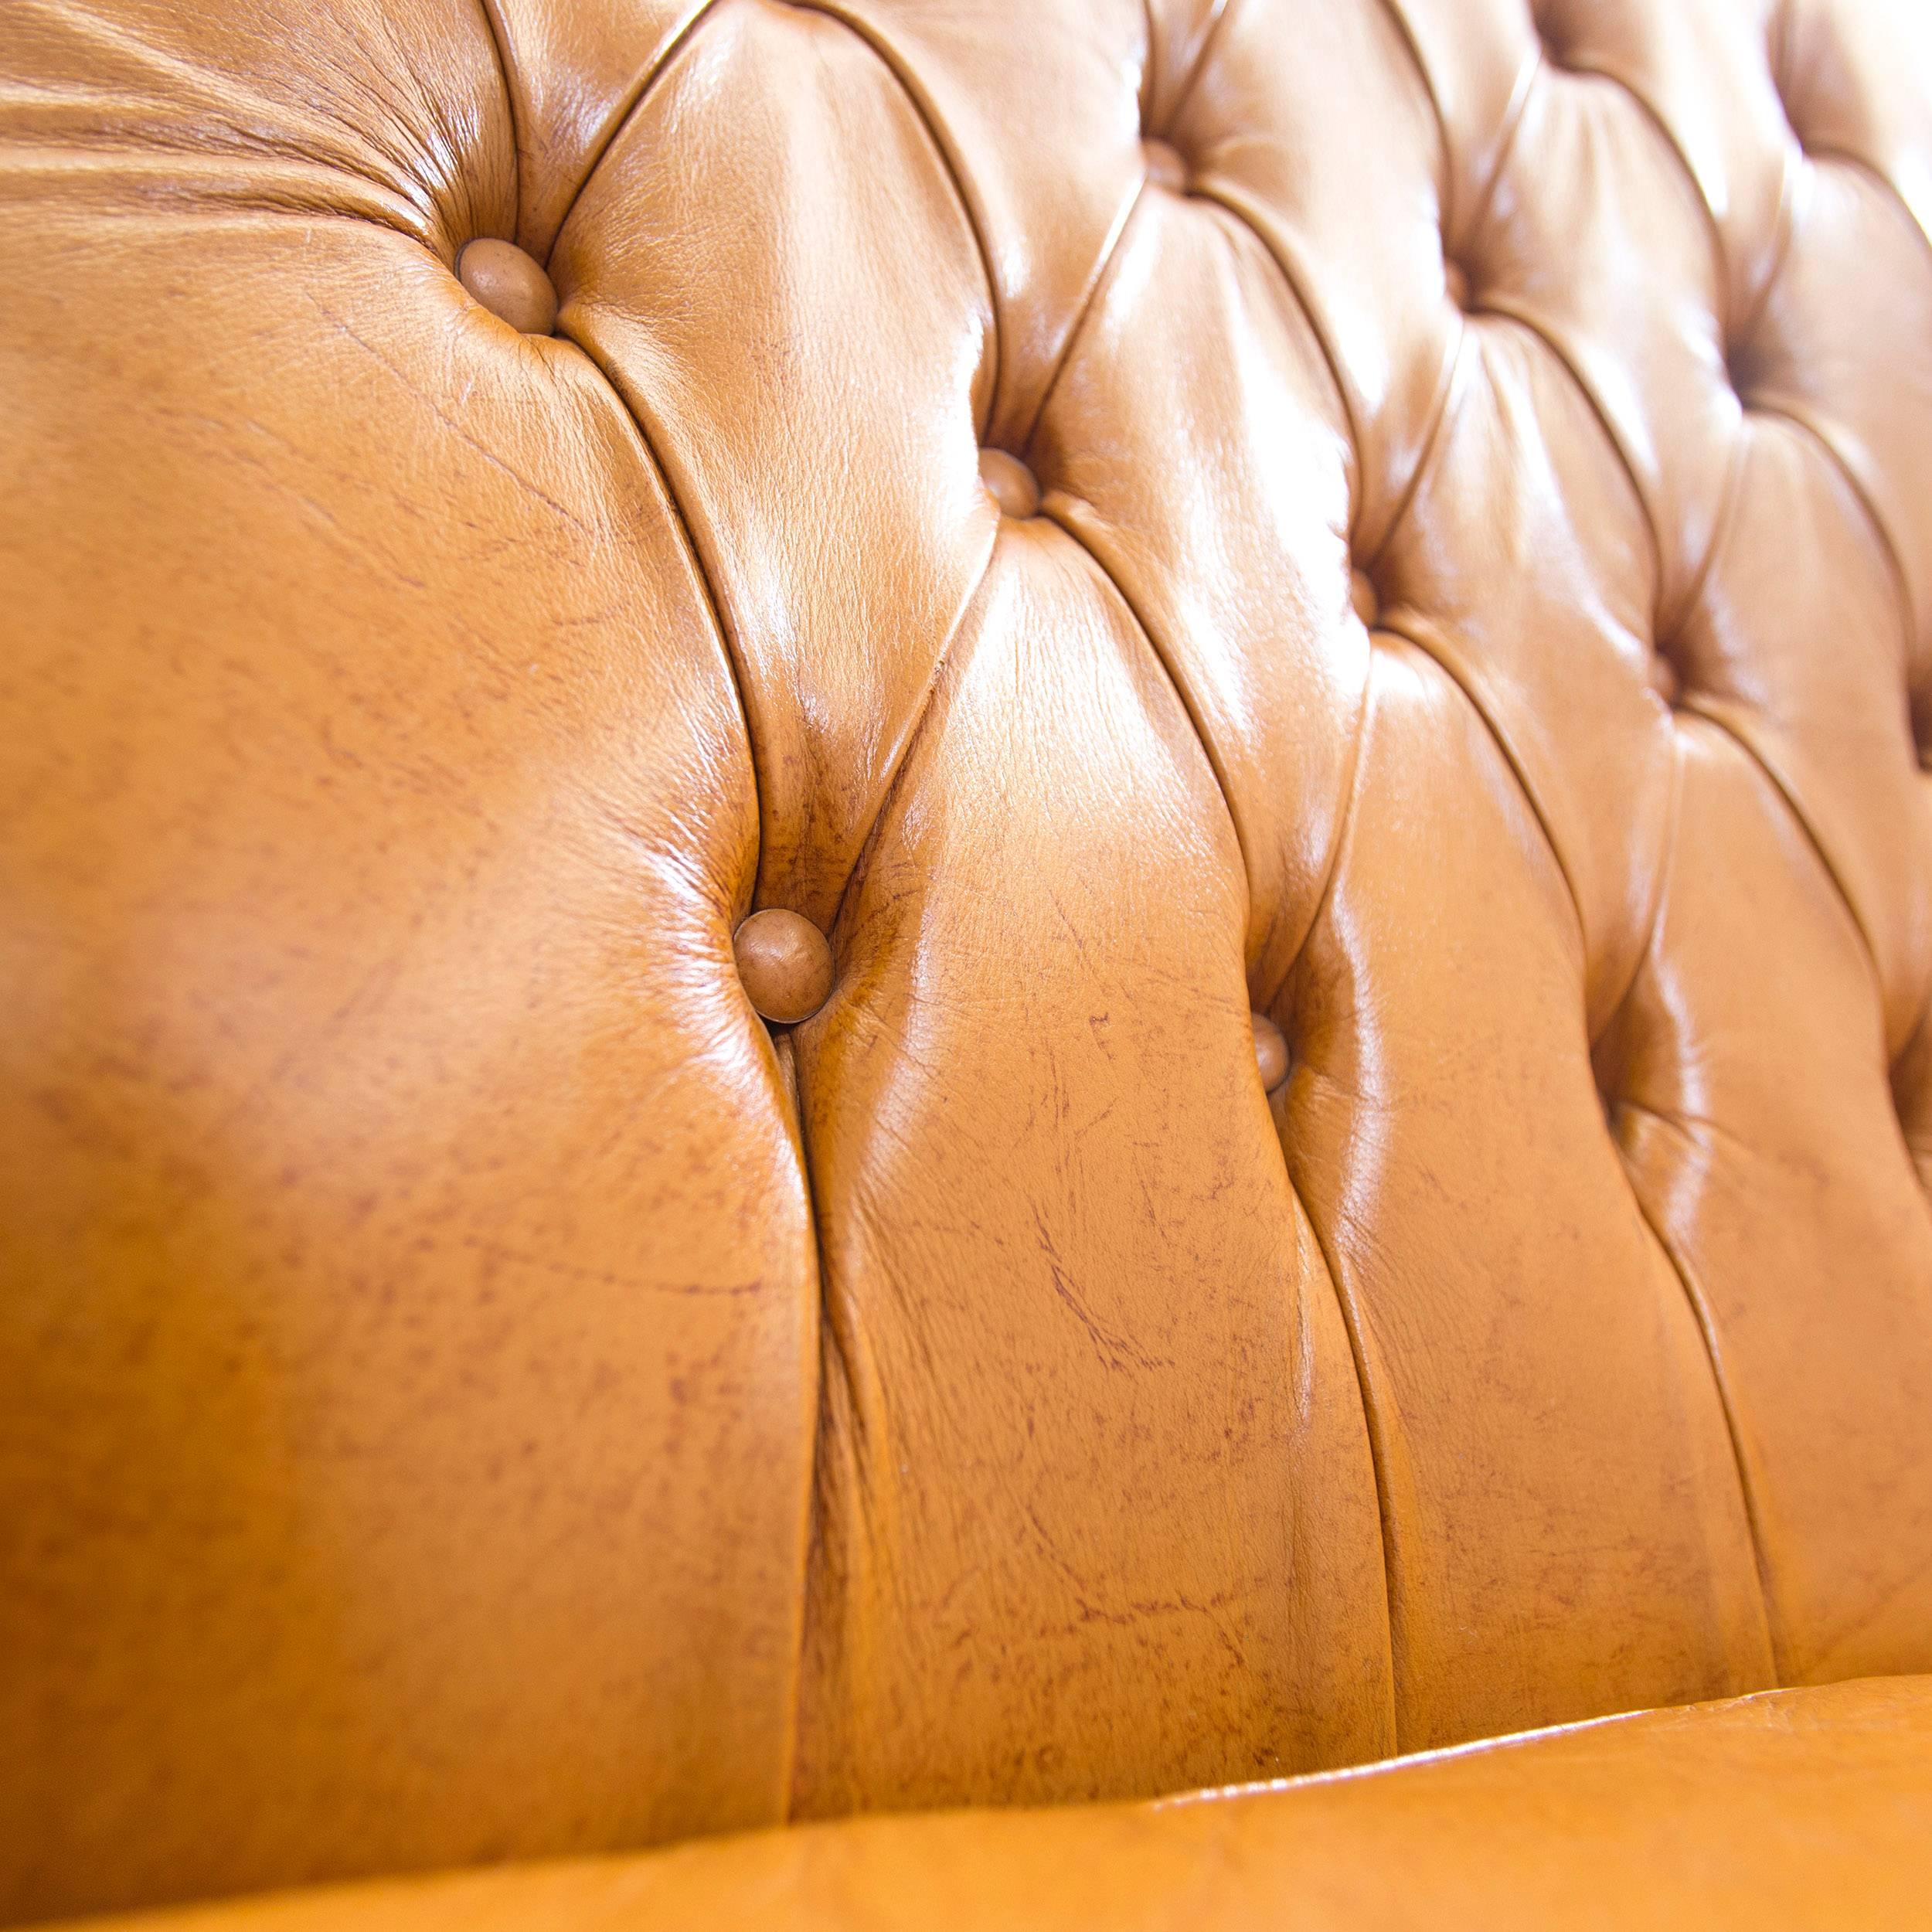 20th Century Chesterfield Sofa in Brown Leather Cognac Two-Seat Sofa in Retro, Vintage Style